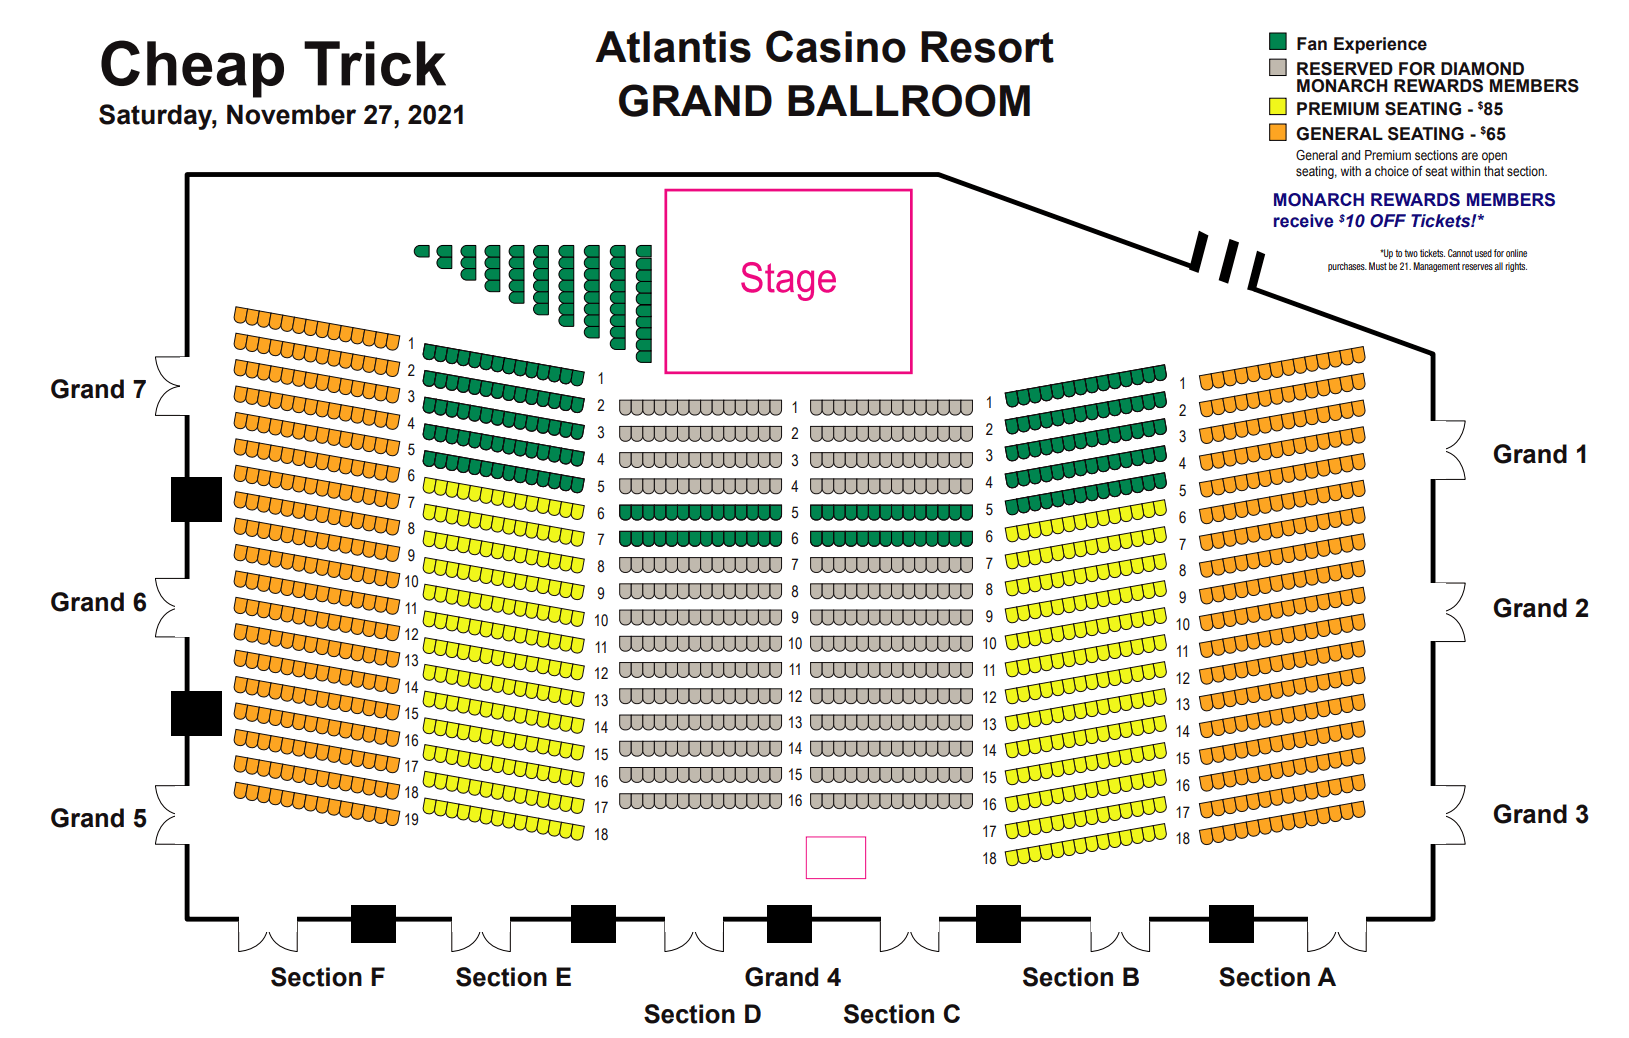 Seating Chart for Cheap Trick Concert